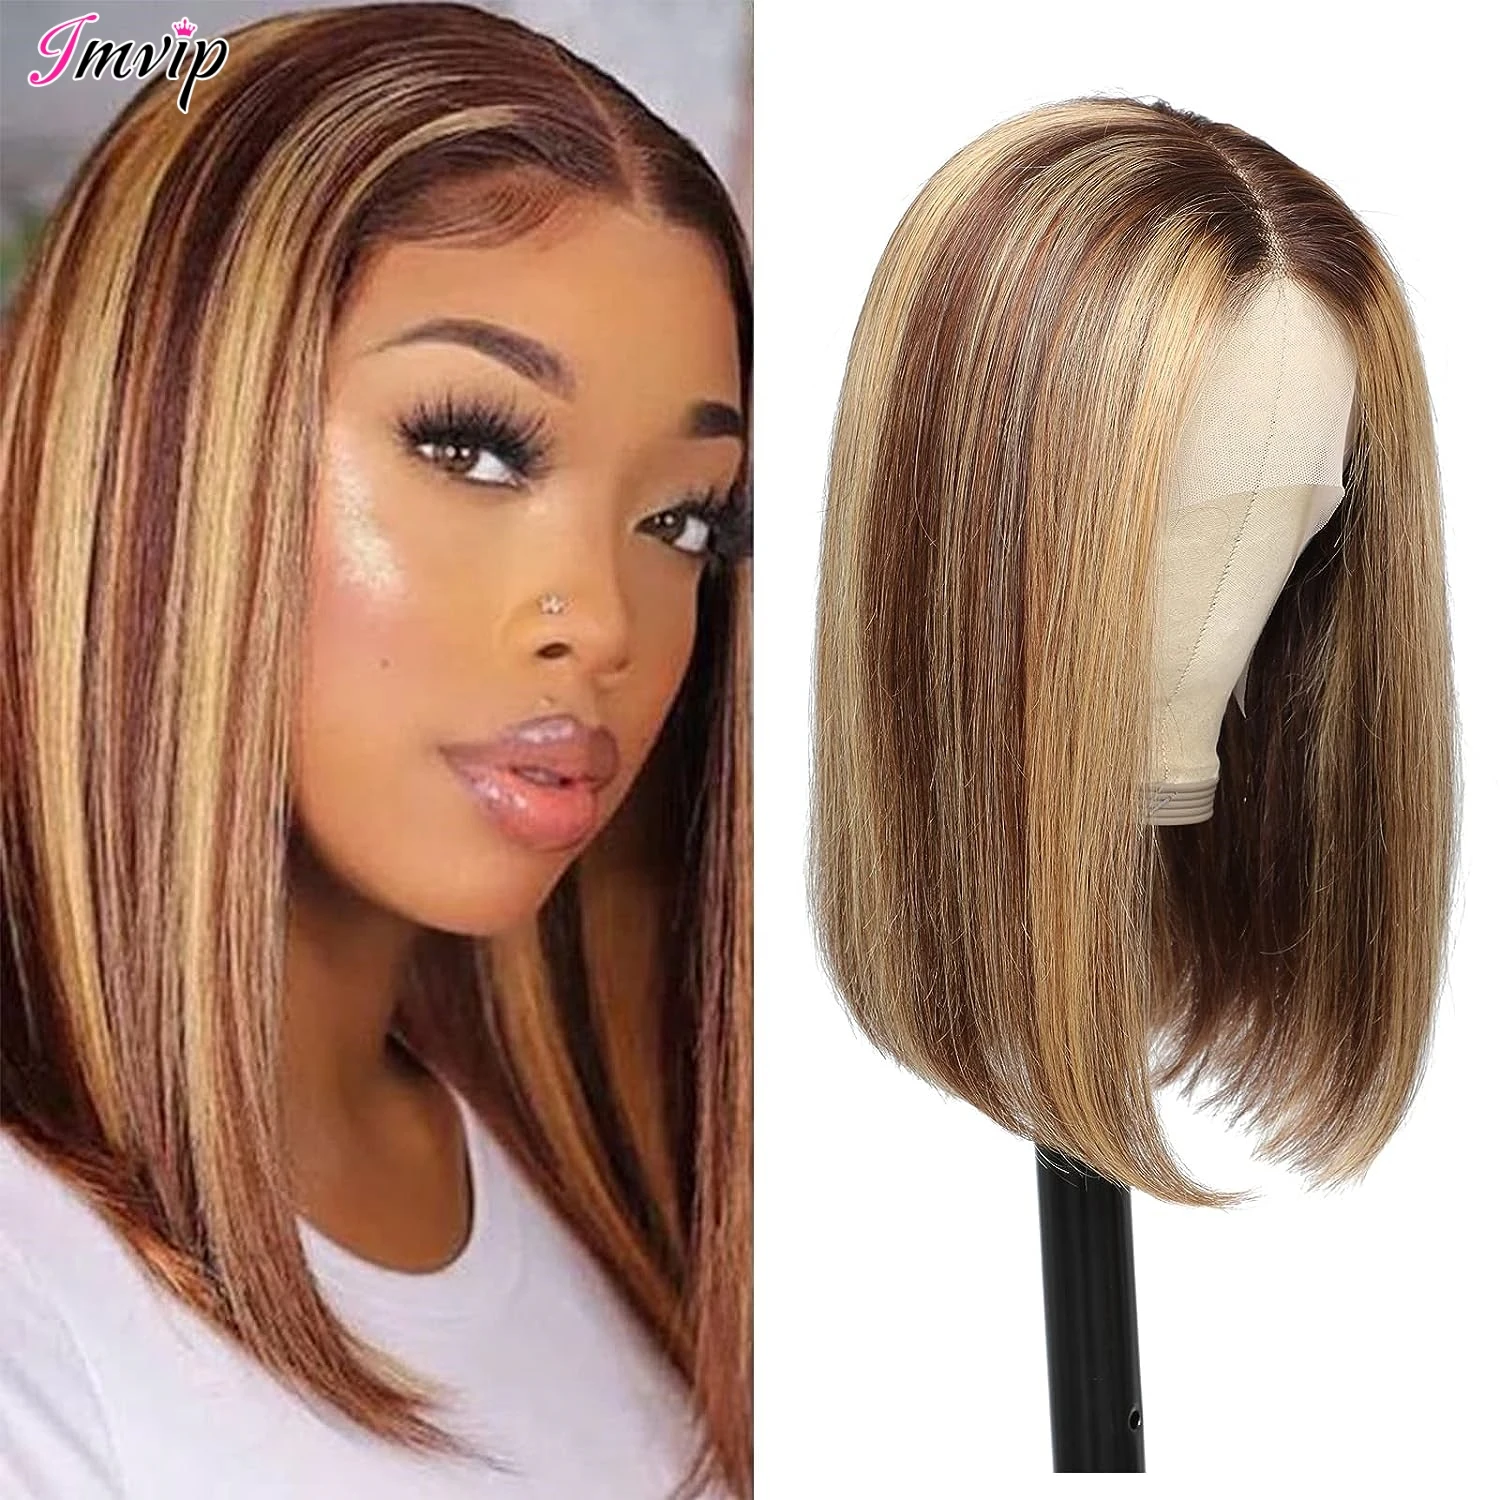 

IAMVIP HD Lace Front Bob Wig for Women 200% Straight Short Remy Hair 13x4 P427 Highlight Color Frontal Glueless Pre Plucked New